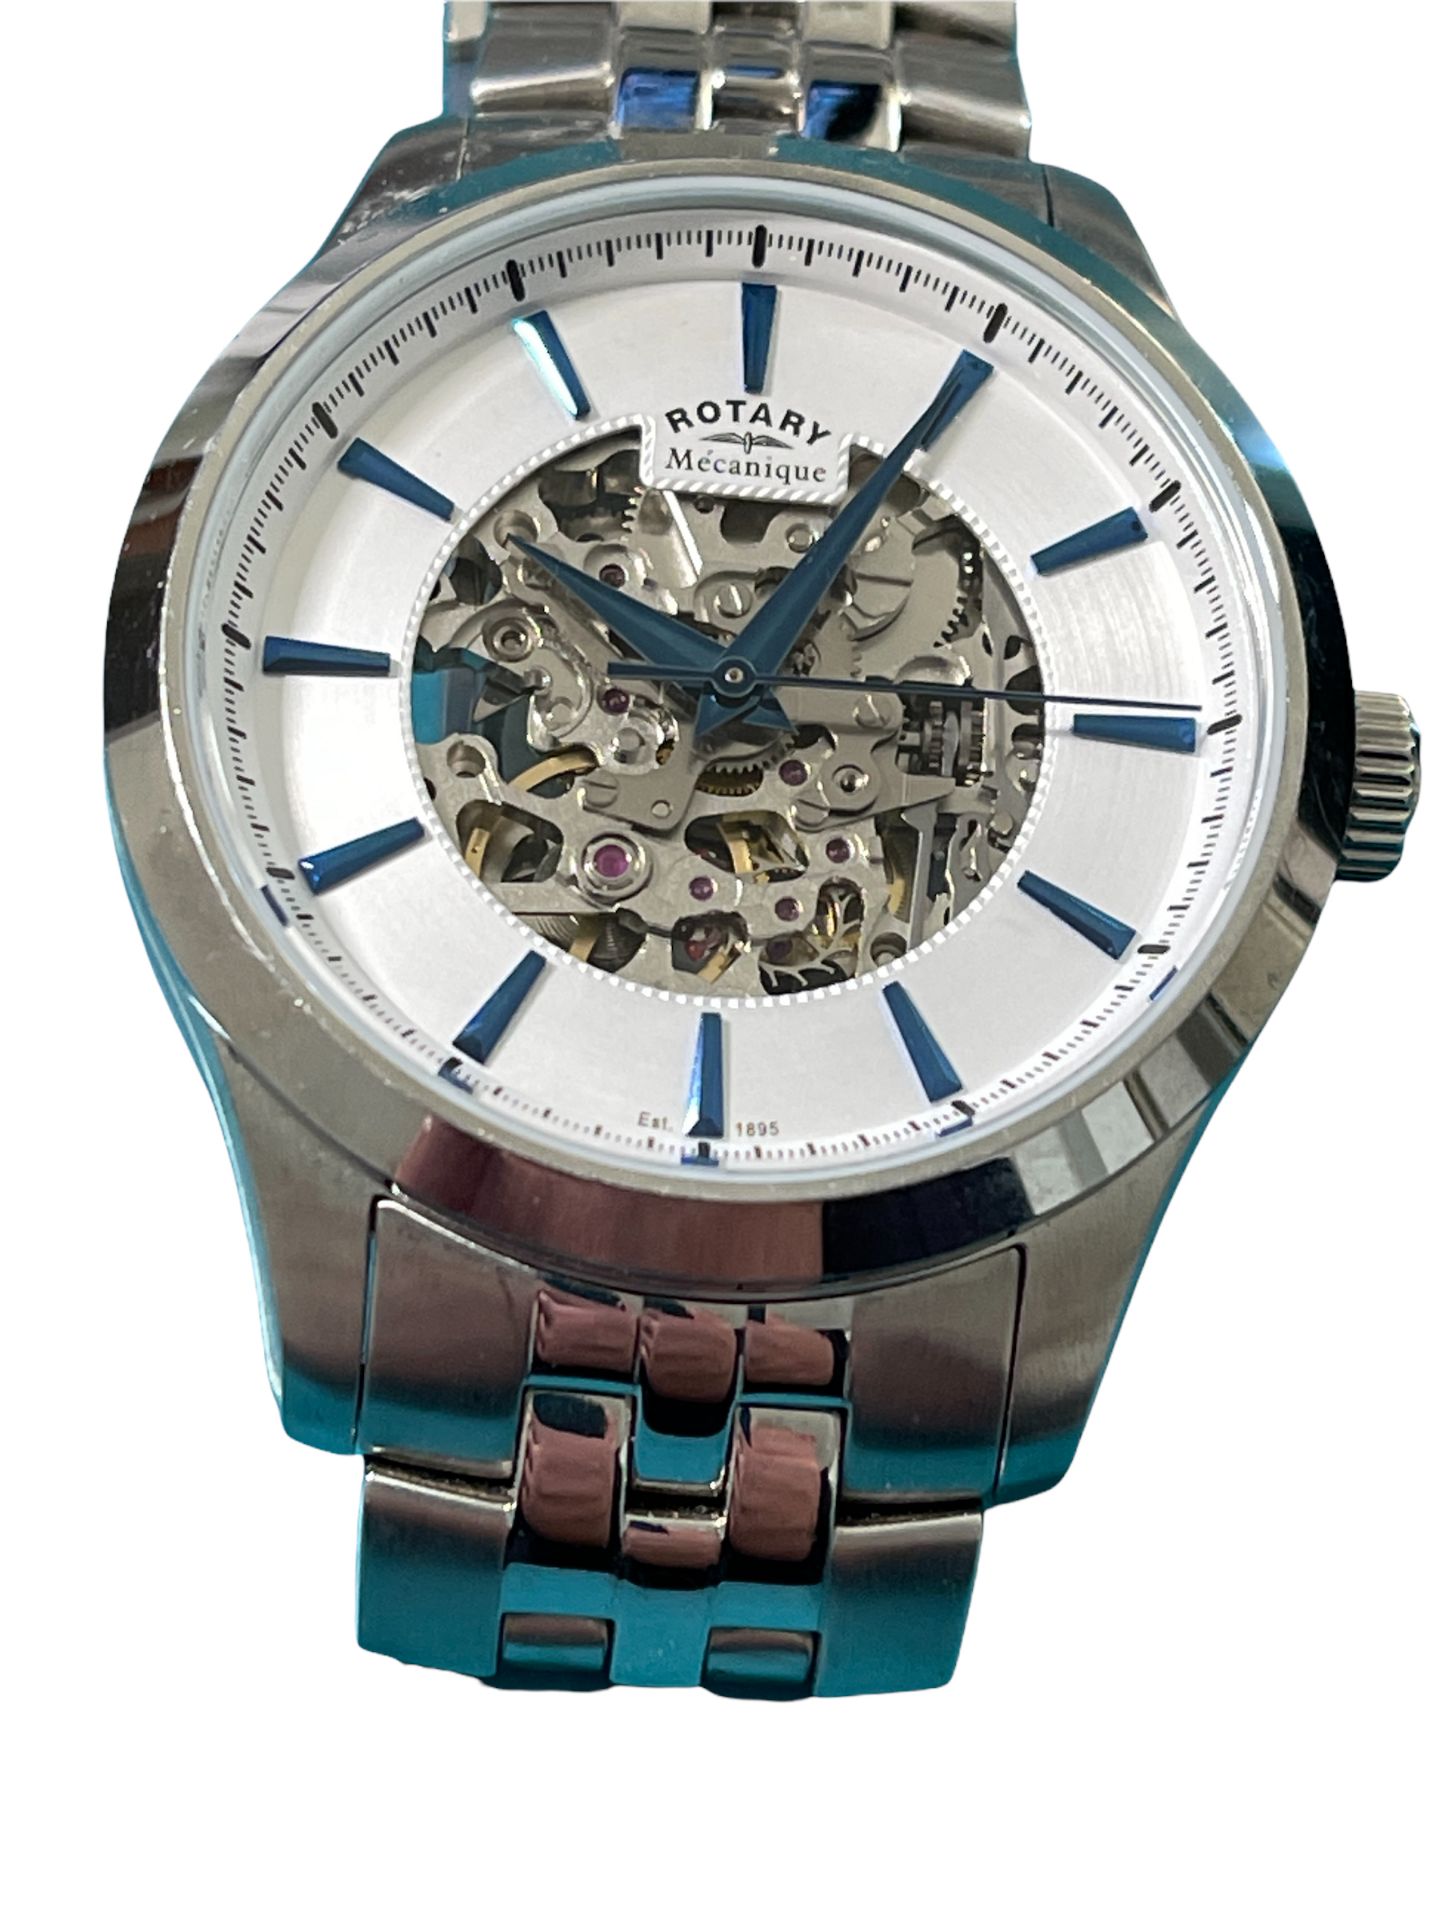 R29 Rotary automatic Skeleton Mans watch - Image 3 of 7